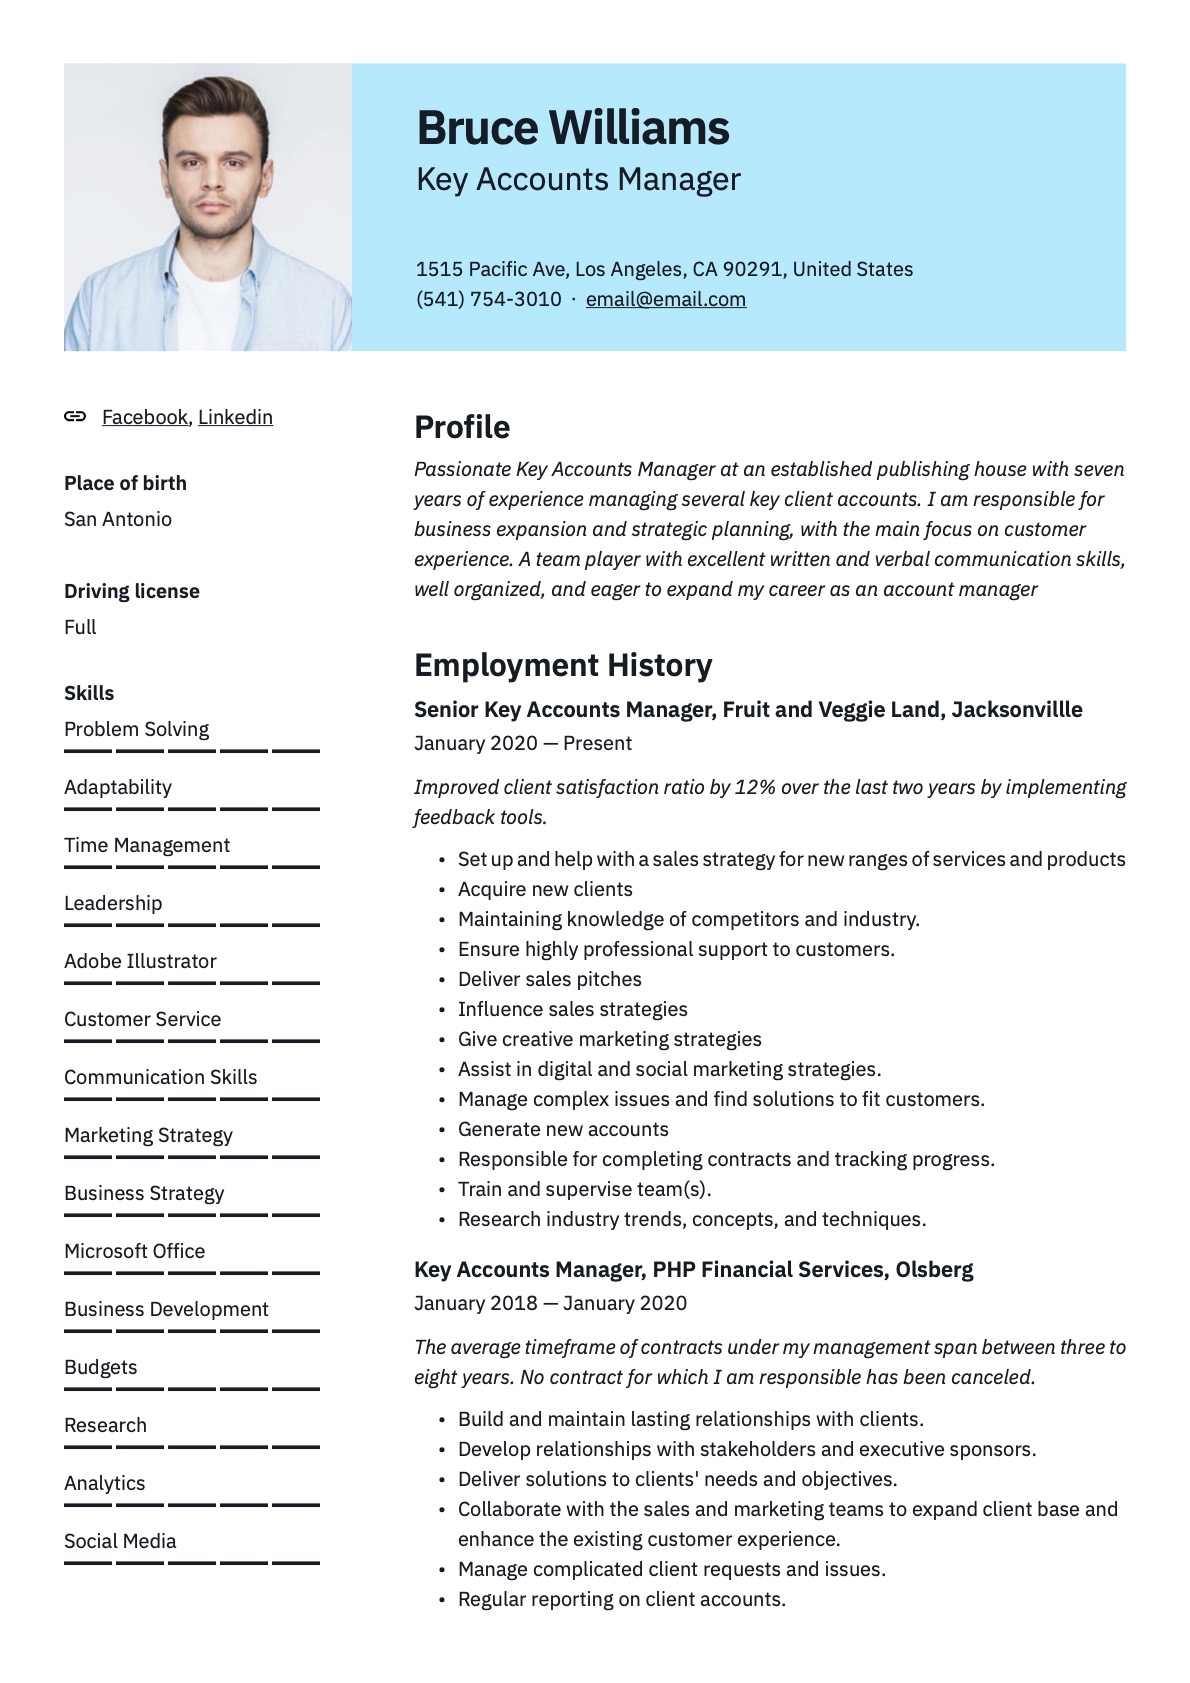 Example resume key accounts manager-3